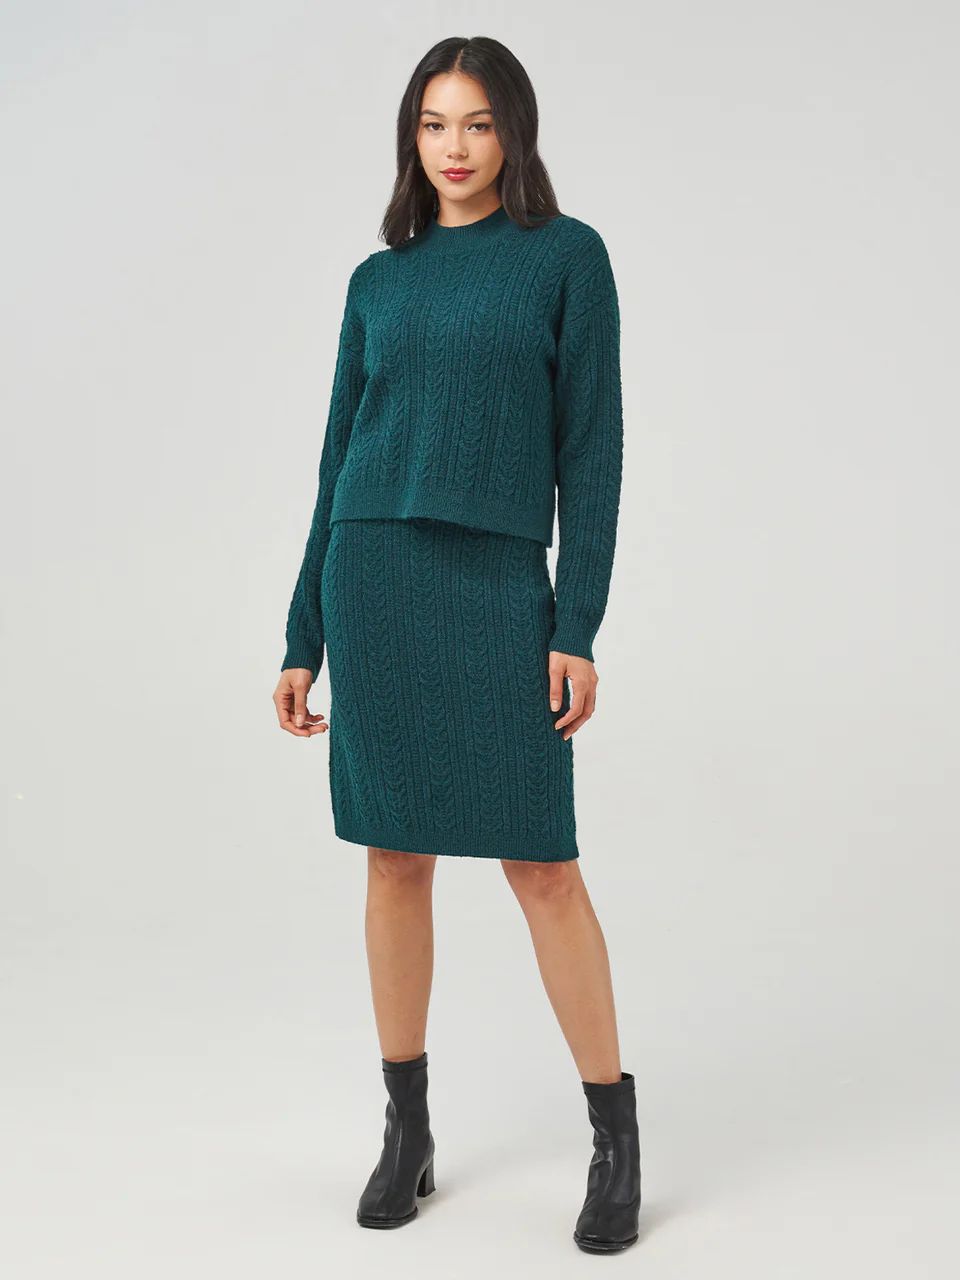 89th + Madison Cable Mockneck Sweater | Daily Thread